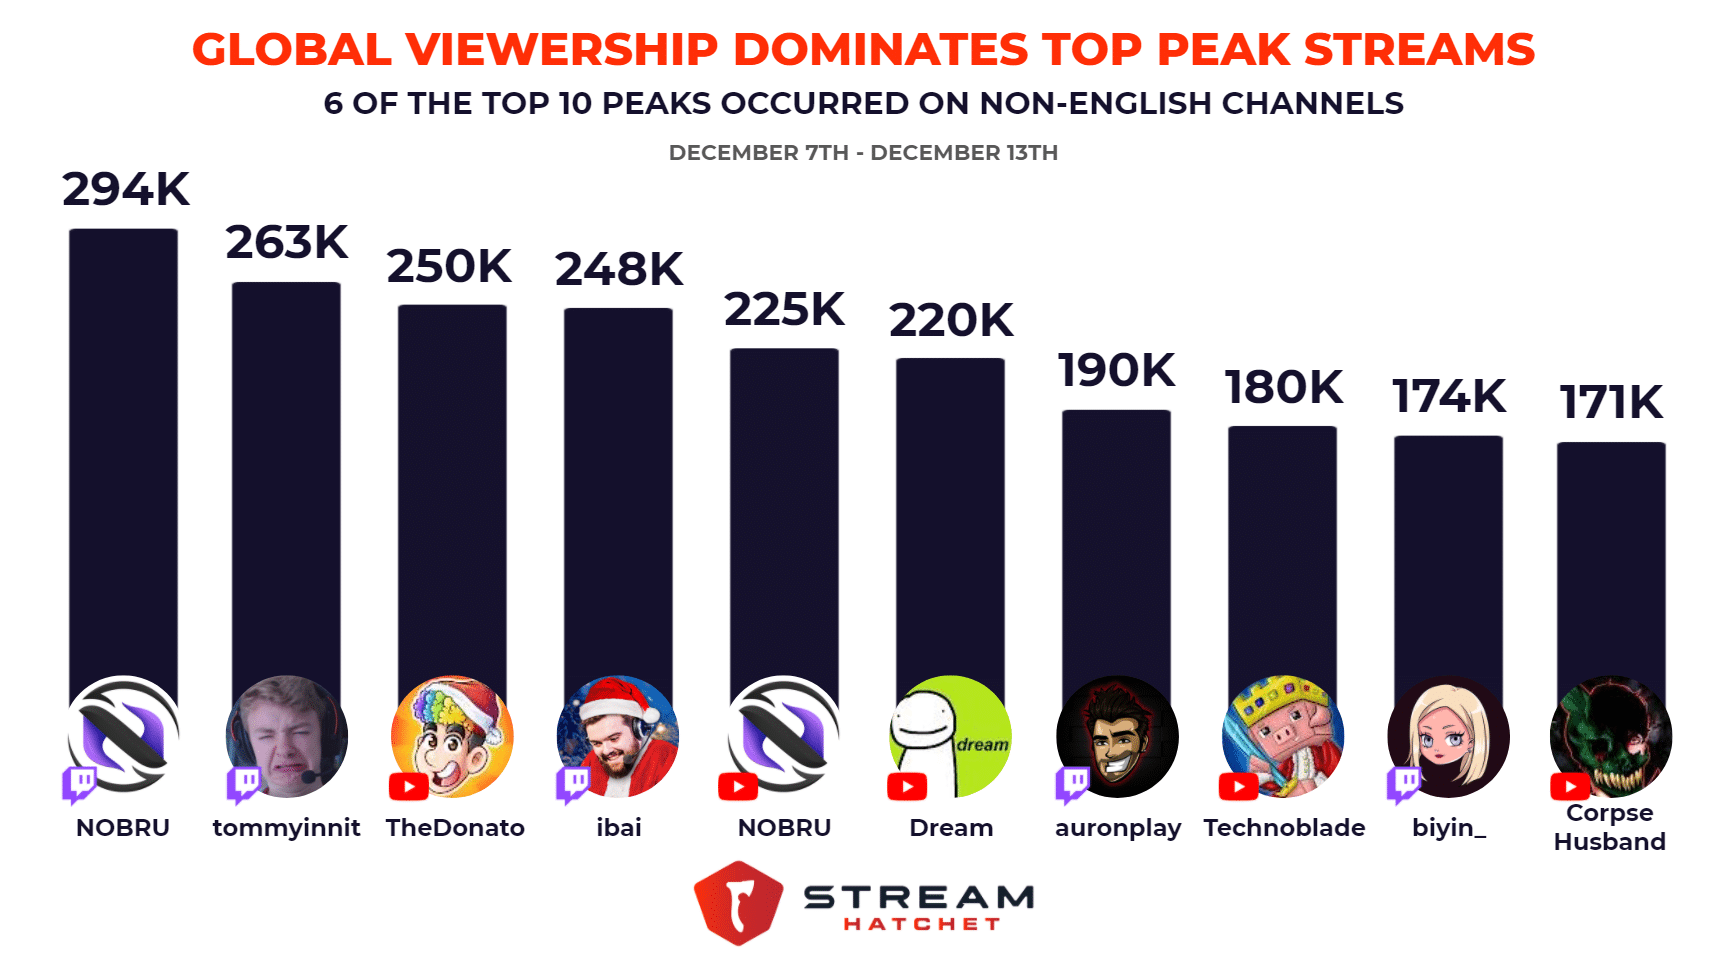 State of the Stream: Twitch viewership up in May